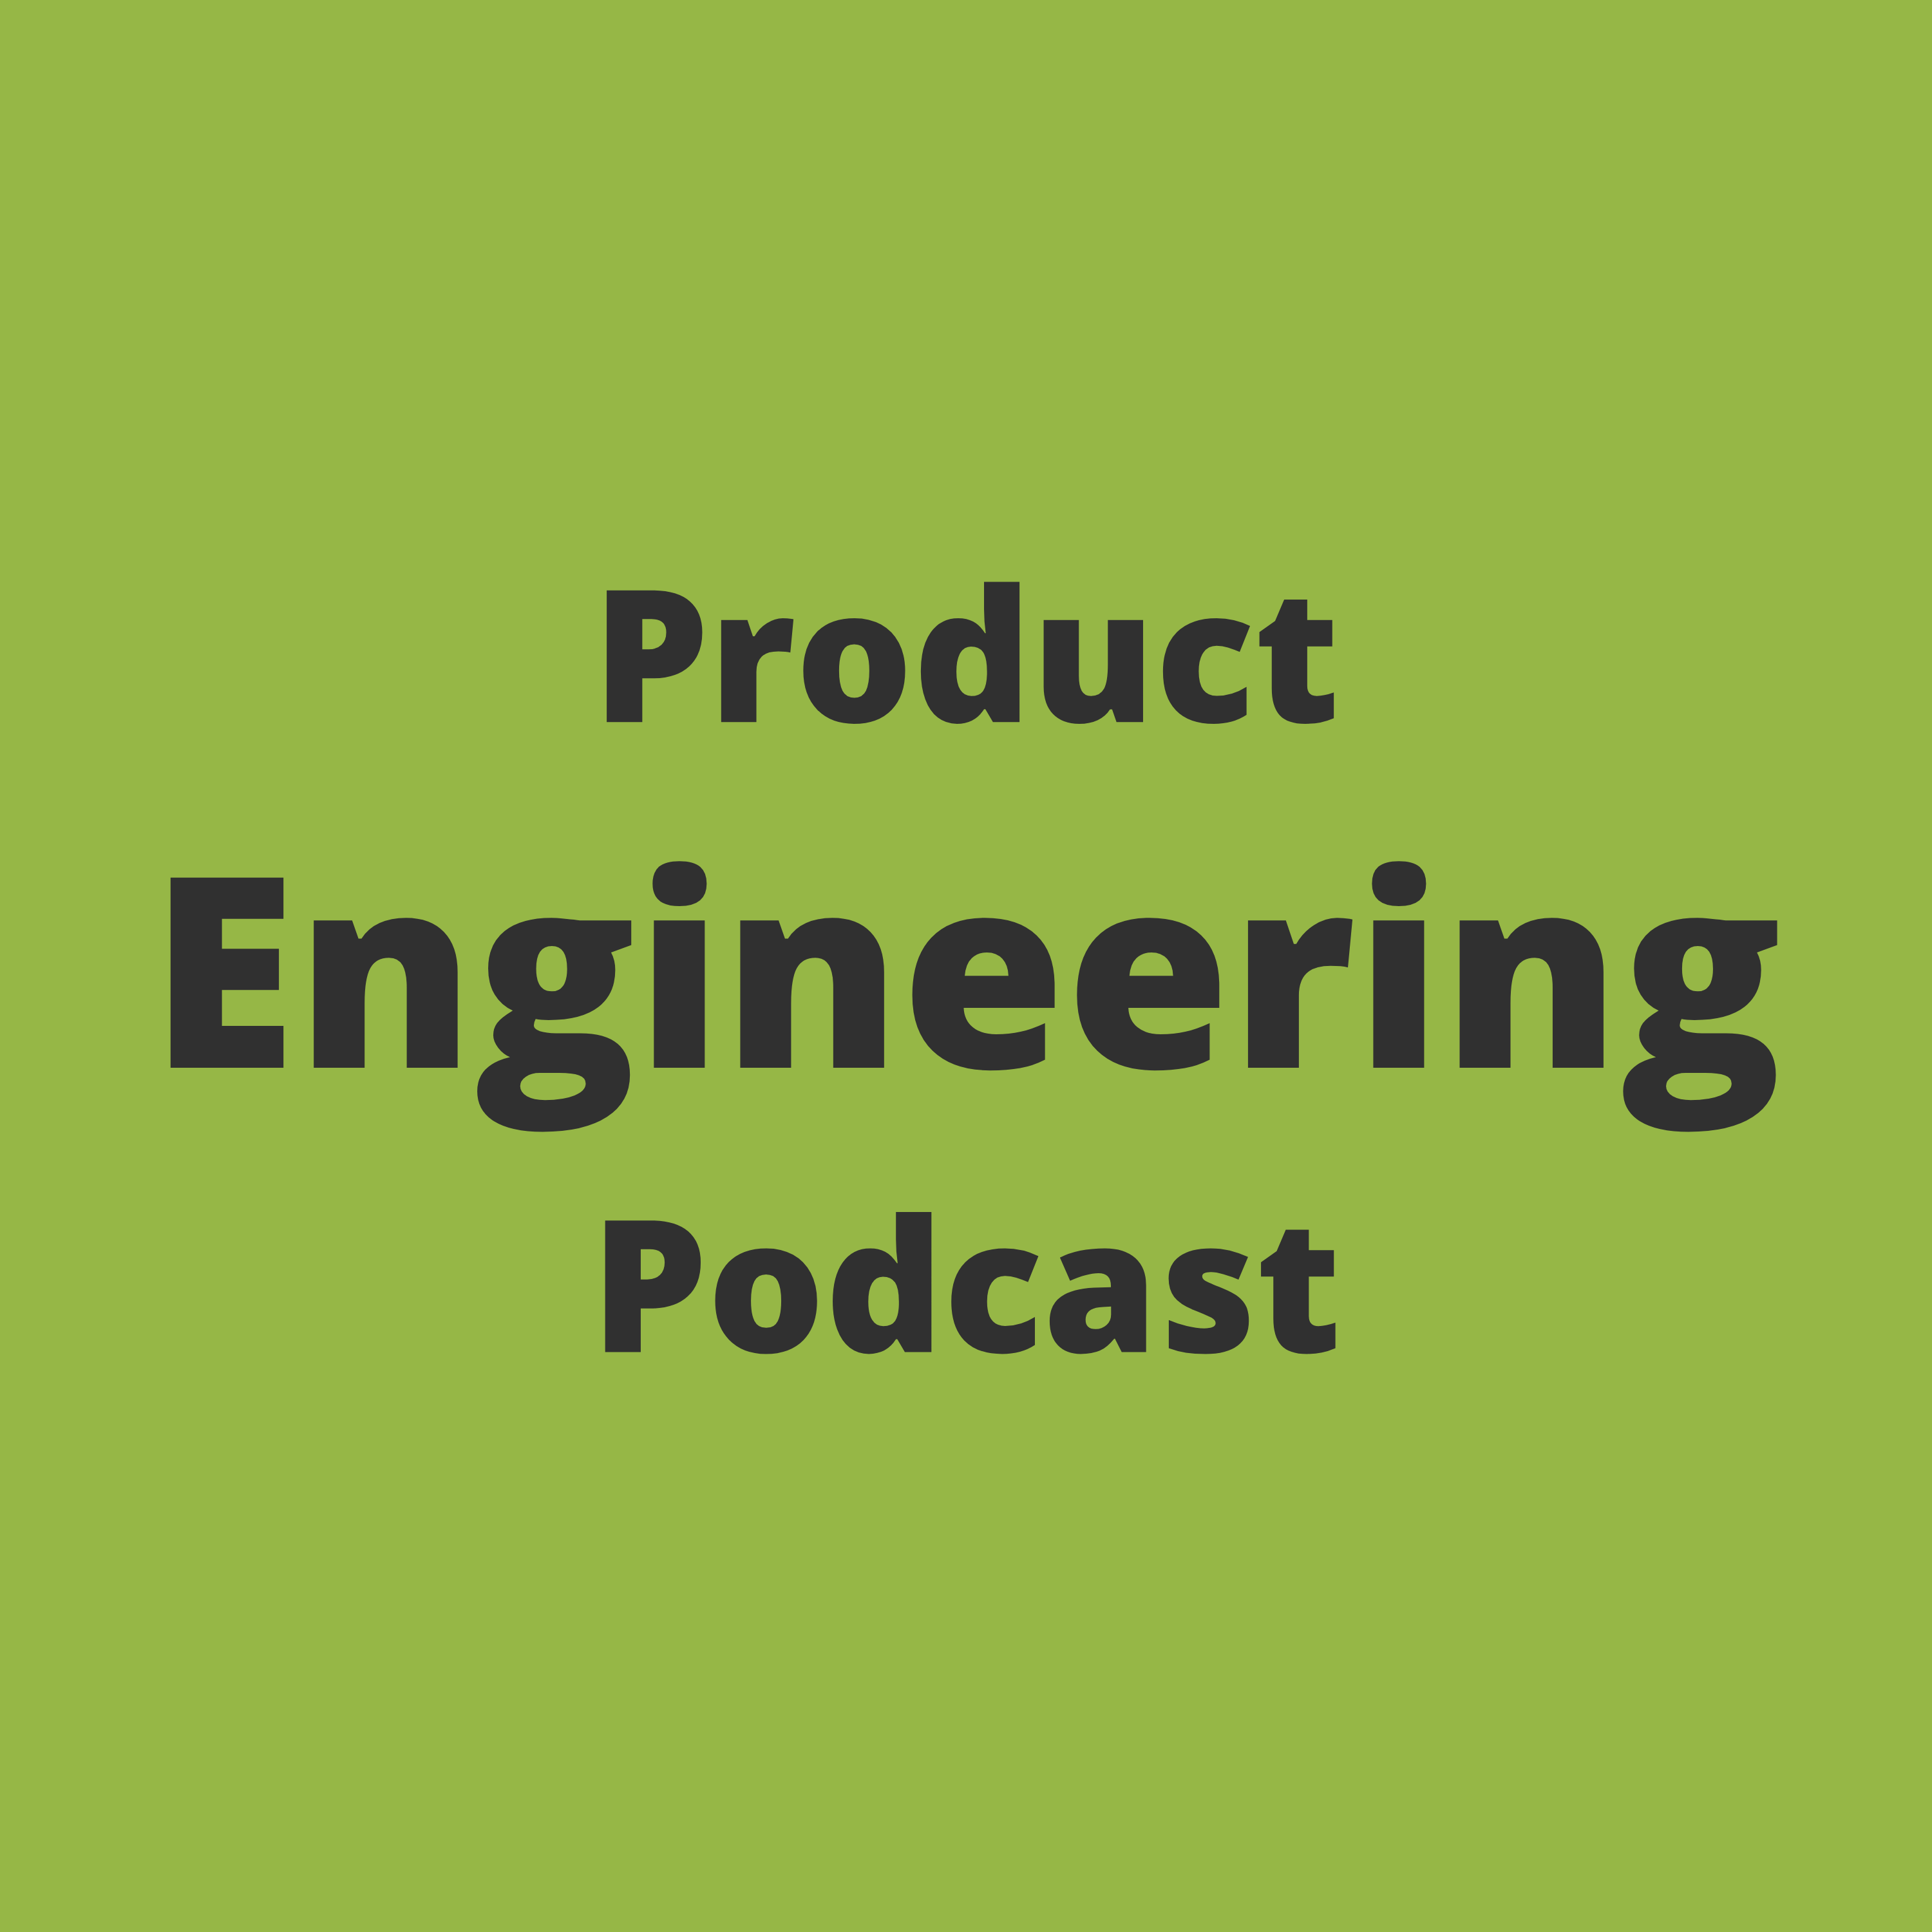 Product Engineering Podcast